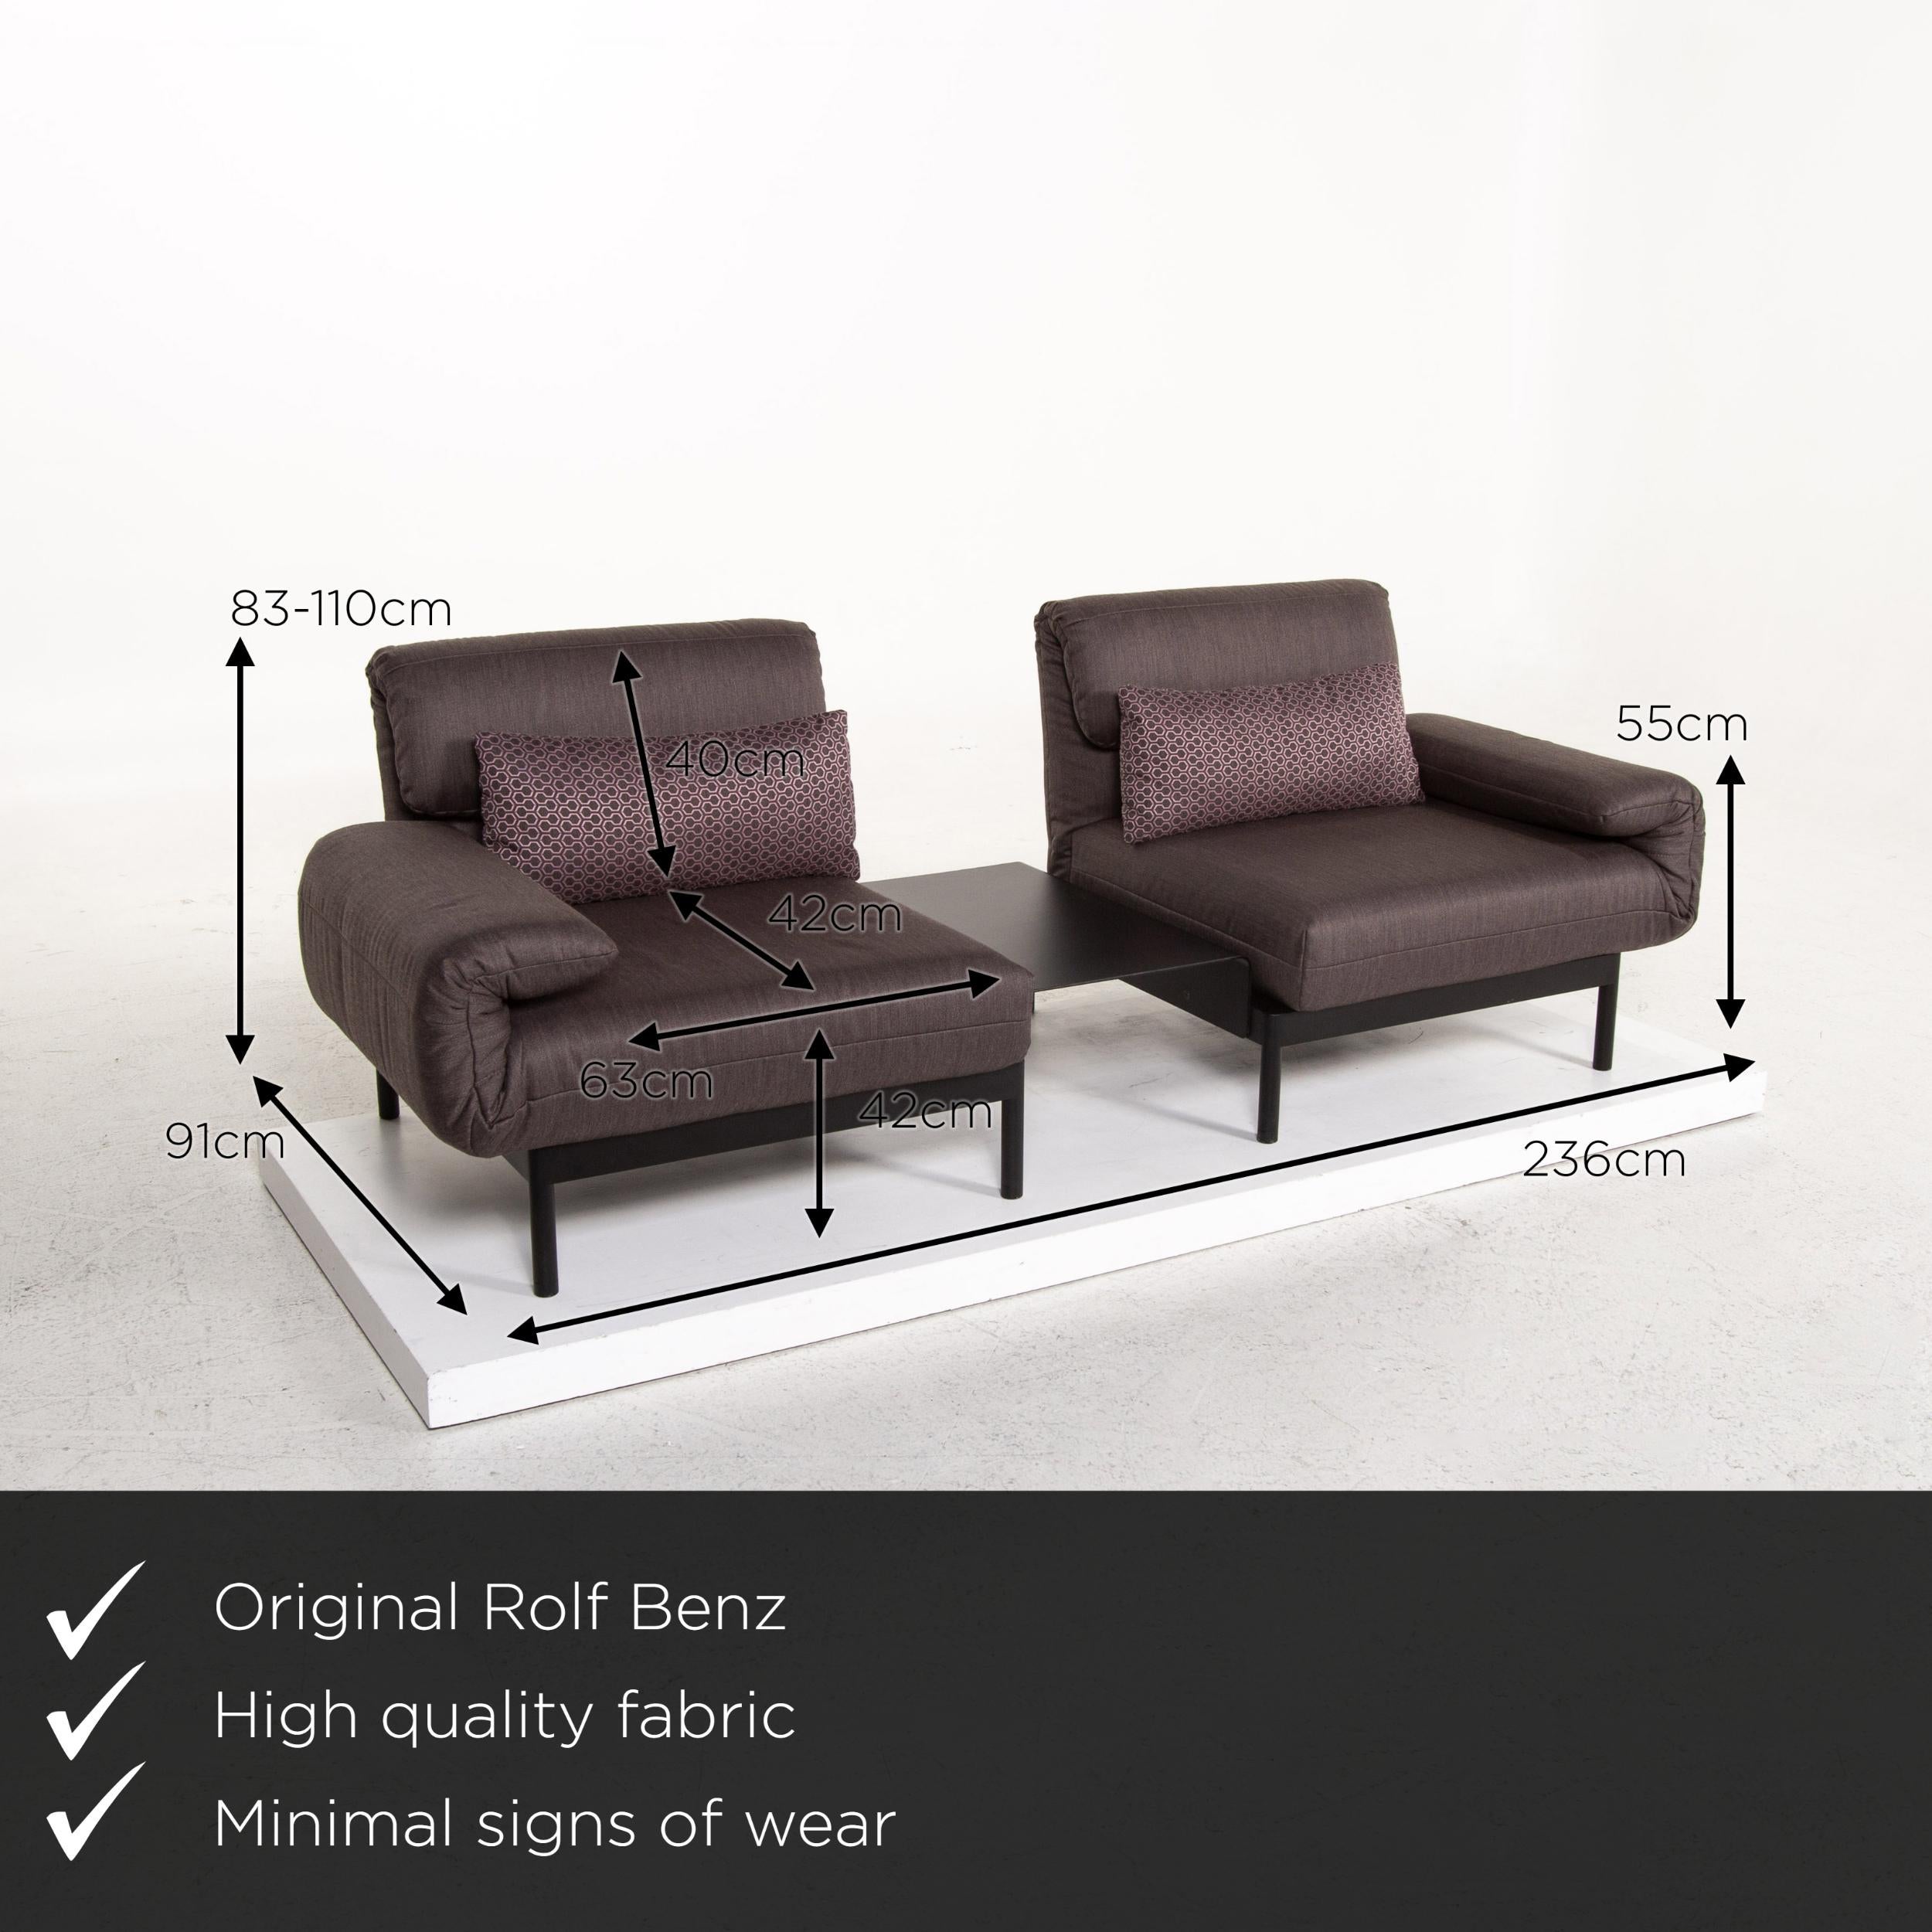 We present to you a Rolf Benz Plura fabric sofa anthracite taupe relax function sofa bed sleep.
 


 Product measurements in centimeters:
 

Depth 91
Width 236
Height 83
Seat height 42
Rest height 55
Seat depth 42
Seat width 63
Back